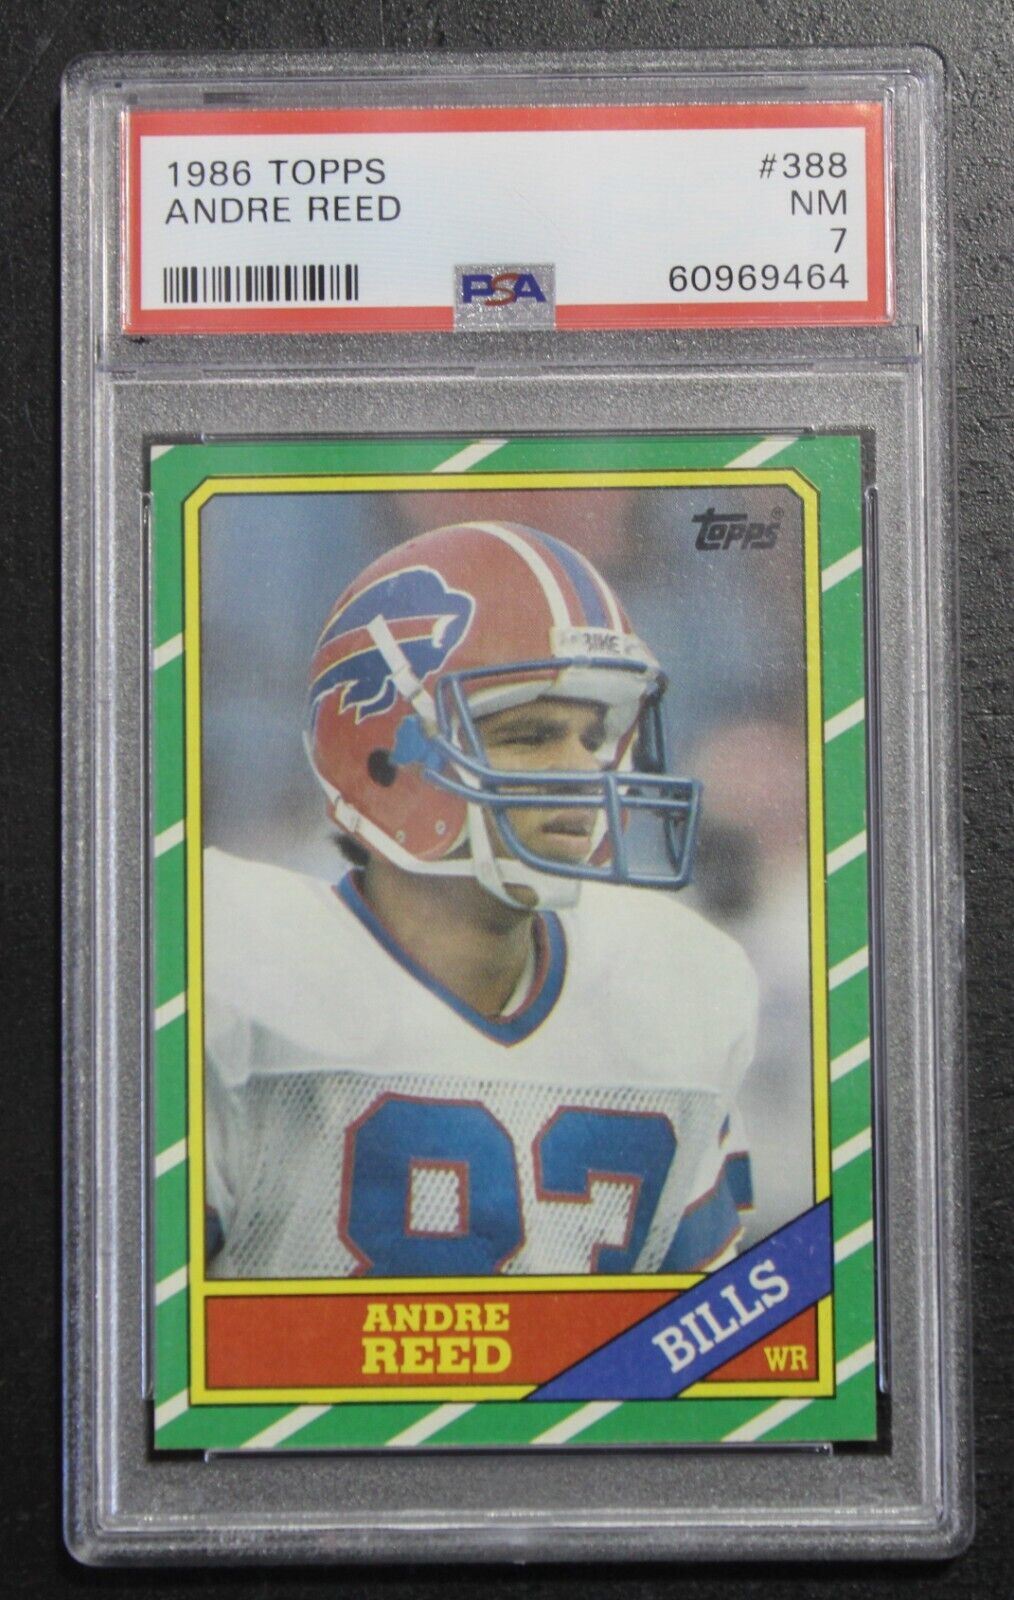 1986 Topps Andre Reed #388 NM 7 Rookie Football Card